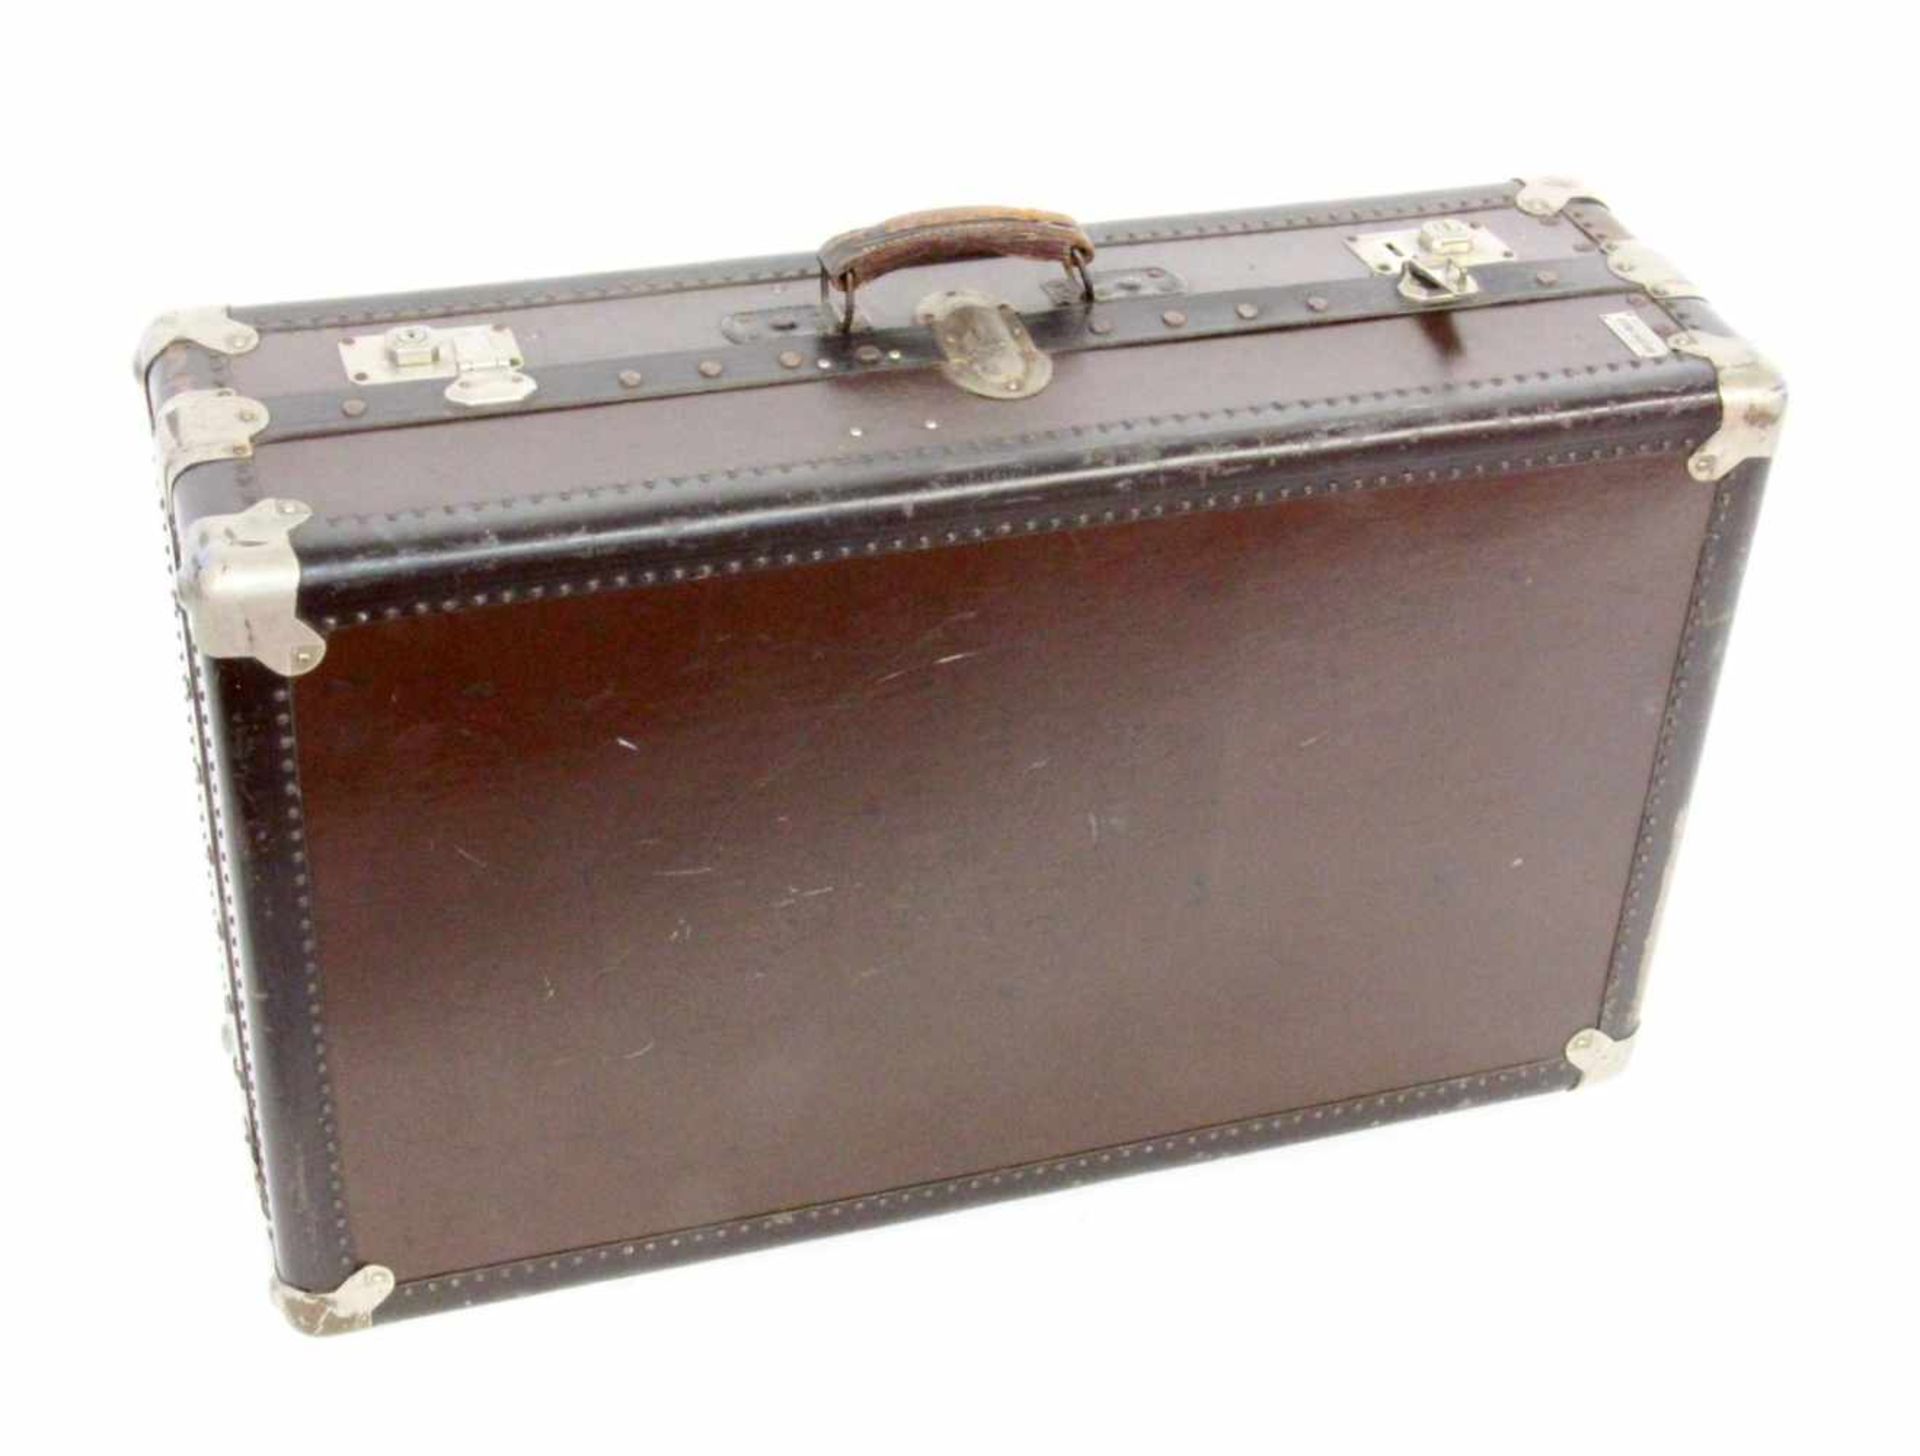 ''AN OLD SUITCASE, 1920s. Hard shell with metal fittings and leather handles. 85 x 51 x 27